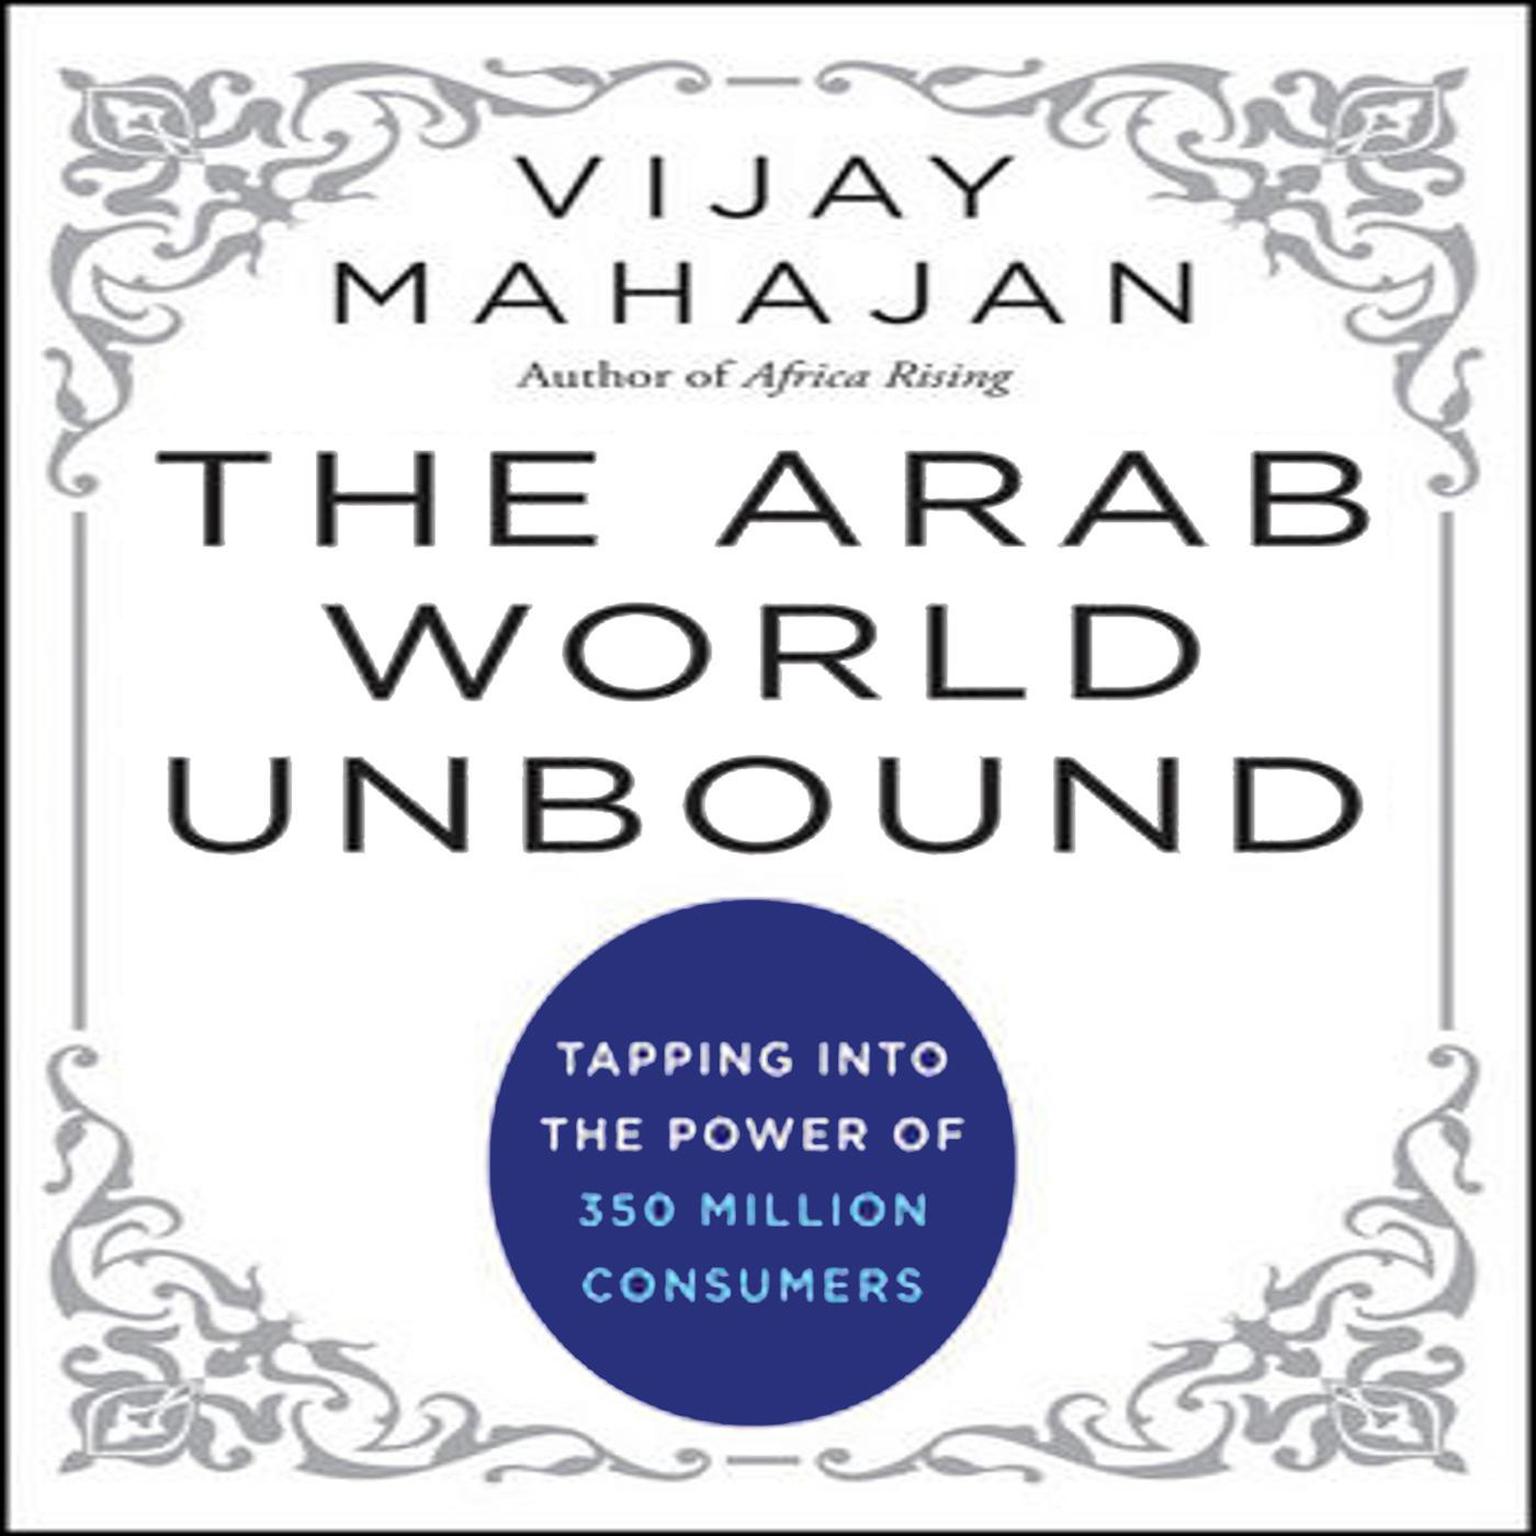 The Arab World Unbound: Tapping into the Power of 350 Million Consumers Audiobook, by Vijay Mahajan